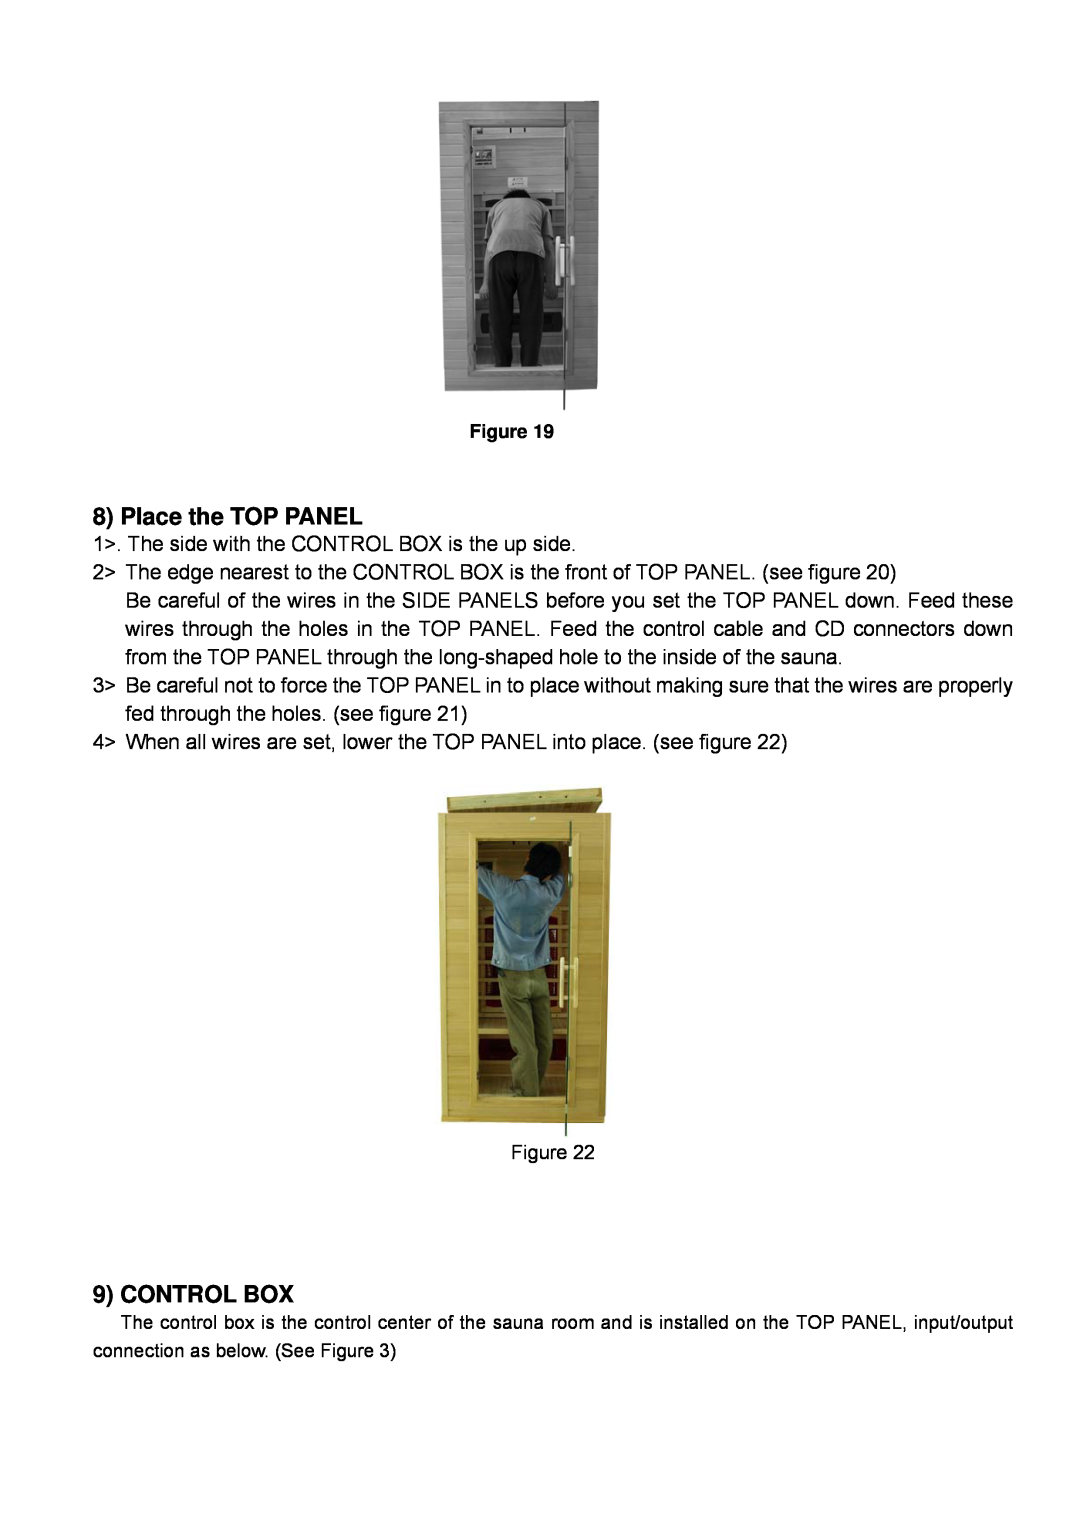 Keys Fitness BS-9101 owner manual Place the TOP PANEL, Control Box 